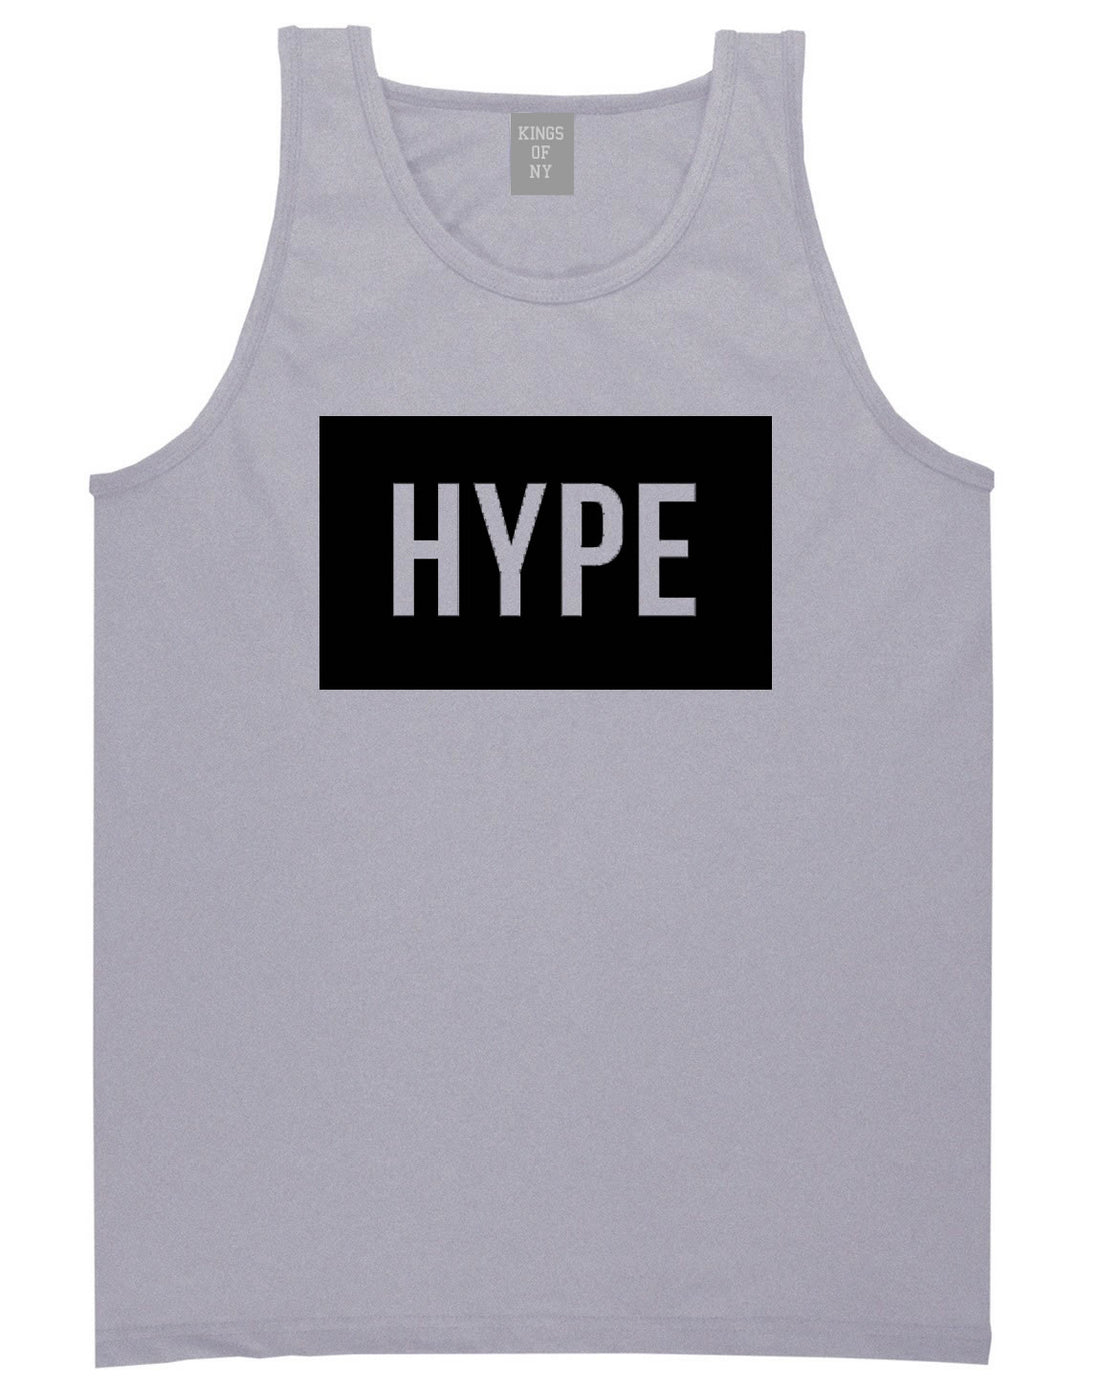 Hype Style Streetwear Brand Logo White by Kings Of NY Tank Top In Grey by Kings Of NY